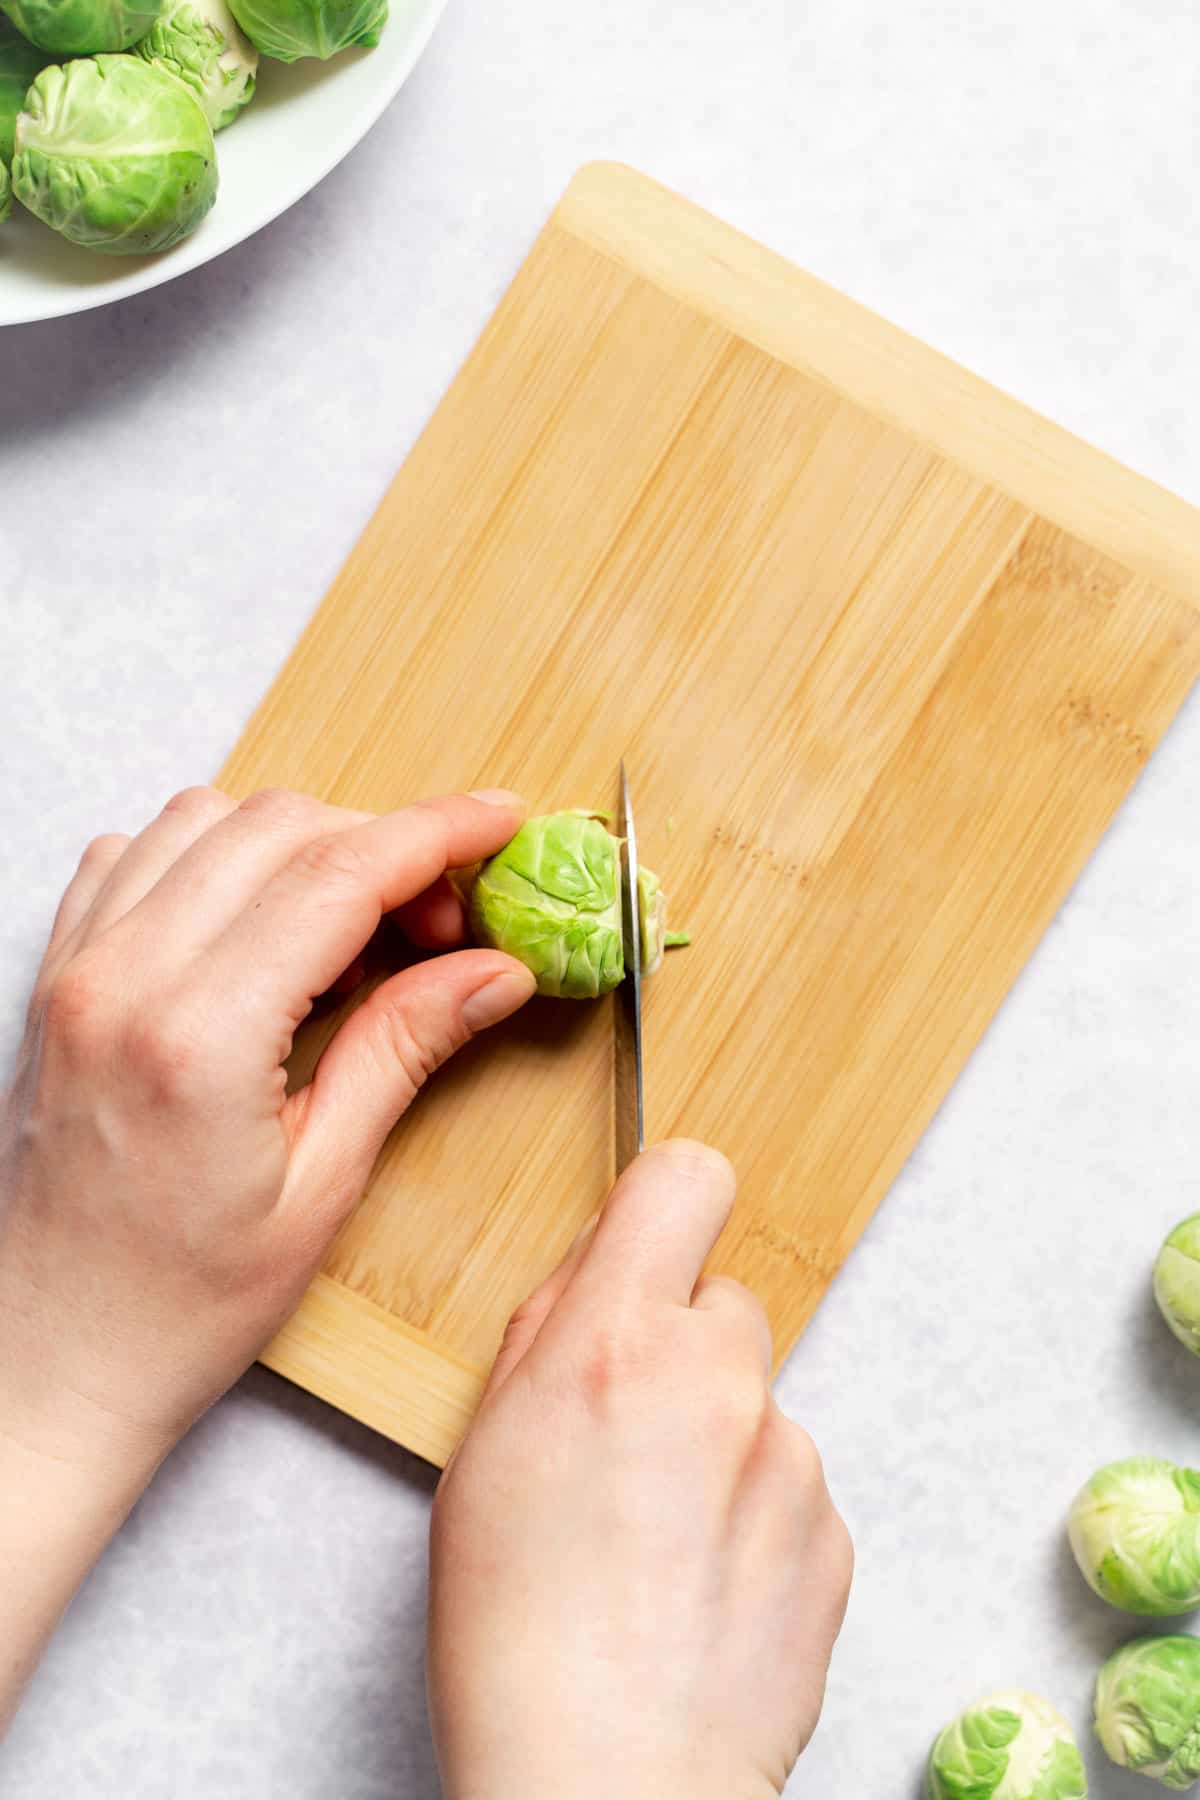 trimming the brussels sprout with knife 